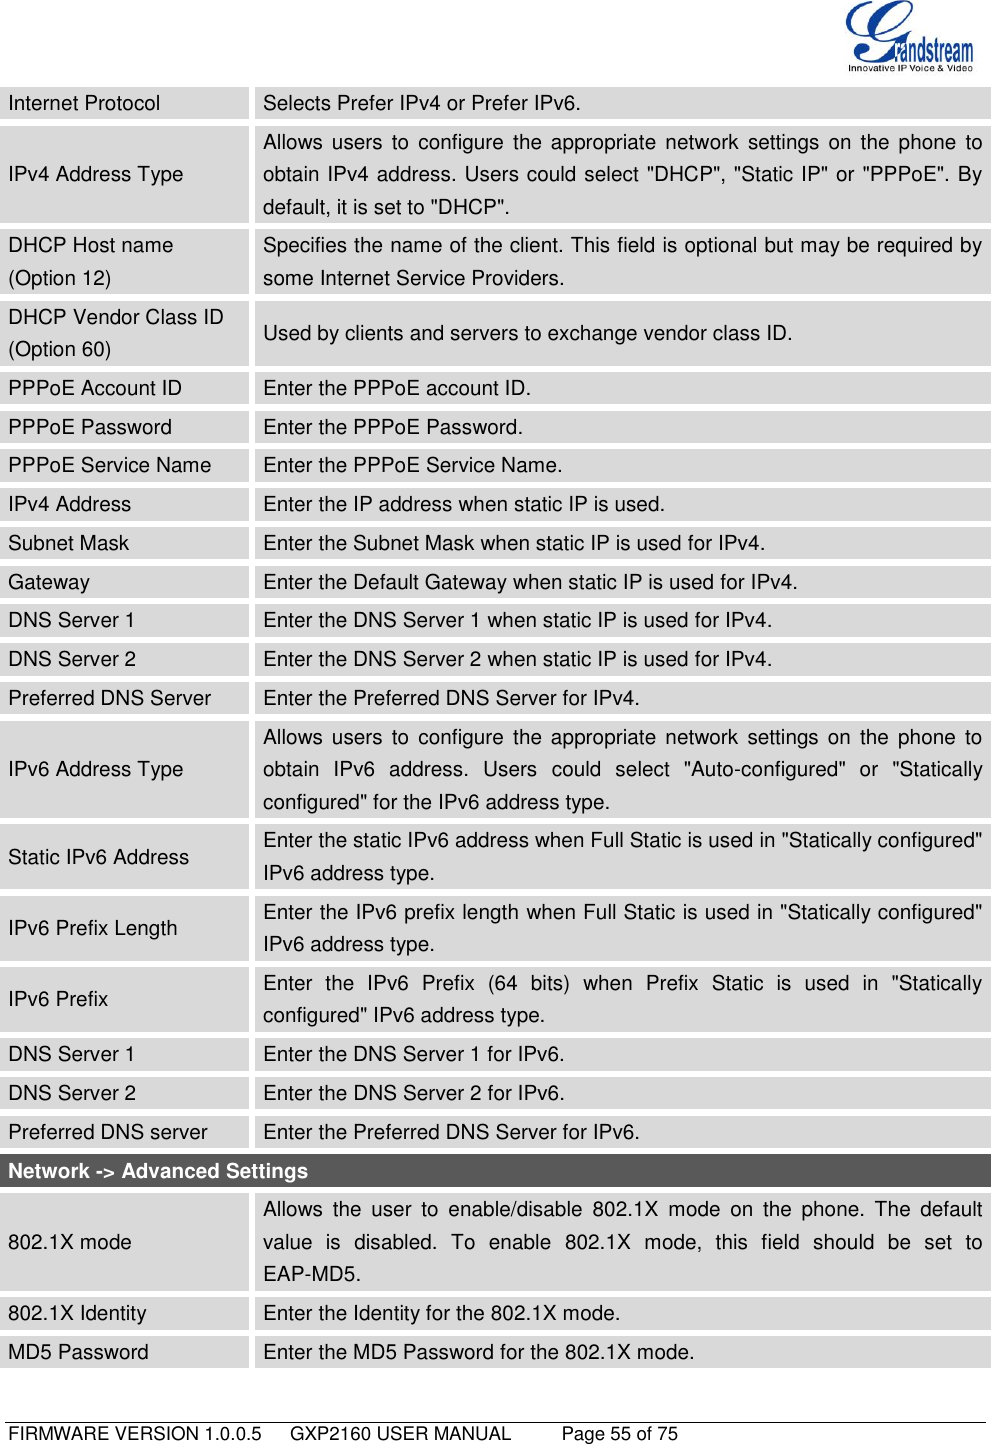   FIRMWARE VERSION 1.0.0.5   GXP2160 USER MANUAL     Page 55 of 75                                   Internet Protocol Selects Prefer IPv4 or Prefer IPv6. IPv4 Address Type Allows  users  to  configure  the  appropriate  network  settings  on  the  phone  to obtain IPv4 address. Users could select &quot;DHCP&quot;, &quot;Static IP&quot; or &quot;PPPoE&quot;. By default, it is set to &quot;DHCP&quot;. DHCP Host name (Option 12) Specifies the name of the client. This field is optional but may be required by some Internet Service Providers.   DHCP Vendor Class ID   (Option 60) Used by clients and servers to exchange vendor class ID. PPPoE Account ID Enter the PPPoE account ID. PPPoE Password Enter the PPPoE Password. PPPoE Service Name Enter the PPPoE Service Name. IPv4 Address Enter the IP address when static IP is used. Subnet Mask Enter the Subnet Mask when static IP is used for IPv4. Gateway Enter the Default Gateway when static IP is used for IPv4. DNS Server 1 Enter the DNS Server 1 when static IP is used for IPv4. DNS Server 2 Enter the DNS Server 2 when static IP is used for IPv4. Preferred DNS Server Enter the Preferred DNS Server for IPv4. IPv6 Address Type Allows  users  to  configure  the  appropriate  network  settings  on  the  phone  to obtain  IPv6  address.  Users  could  select  &quot;Auto-configured&quot;  or  &quot;Statically configured&quot; for the IPv6 address type. Static IPv6 Address Enter the static IPv6 address when Full Static is used in &quot;Statically configured&quot; IPv6 address type. IPv6 Prefix Length Enter the IPv6 prefix length when Full Static is used in &quot;Statically configured&quot; IPv6 address type. IPv6 Prefix Enter  the  IPv6  Prefix  (64  bits)  when  Prefix  Static  is  used  in  &quot;Statically configured&quot; IPv6 address type. DNS Server 1 Enter the DNS Server 1 for IPv6. DNS Server 2 Enter the DNS Server 2 for IPv6. Preferred DNS server Enter the Preferred DNS Server for IPv6. Network -&gt; Advanced Settings 802.1X mode Allows  the  user  to  enable/disable  802.1X  mode  on  the  phone.  The  default value  is  disabled.  To  enable  802.1X  mode,  this  field  should  be  set  to EAP-MD5. 802.1X Identity Enter the Identity for the 802.1X mode. MD5 Password Enter the MD5 Password for the 802.1X mode. 